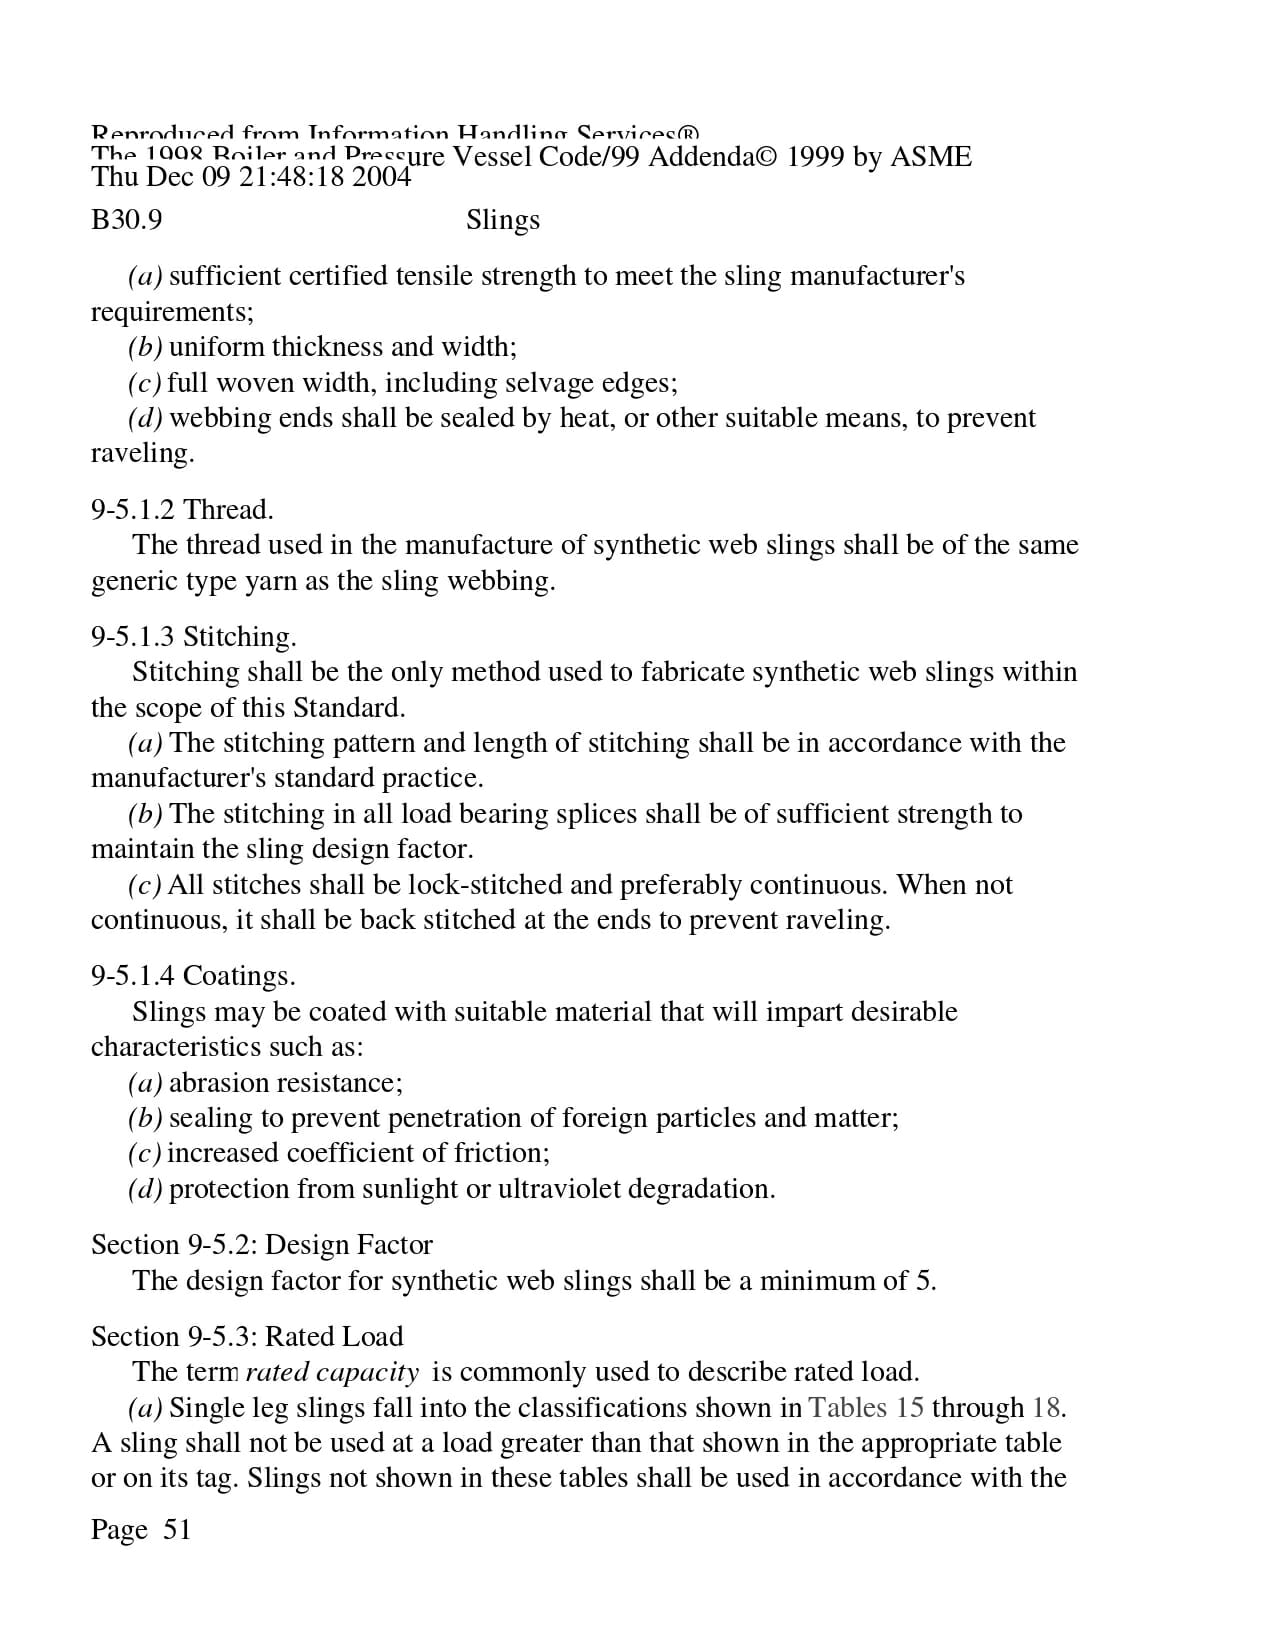 vdocument.in_asme-b309_page-0051